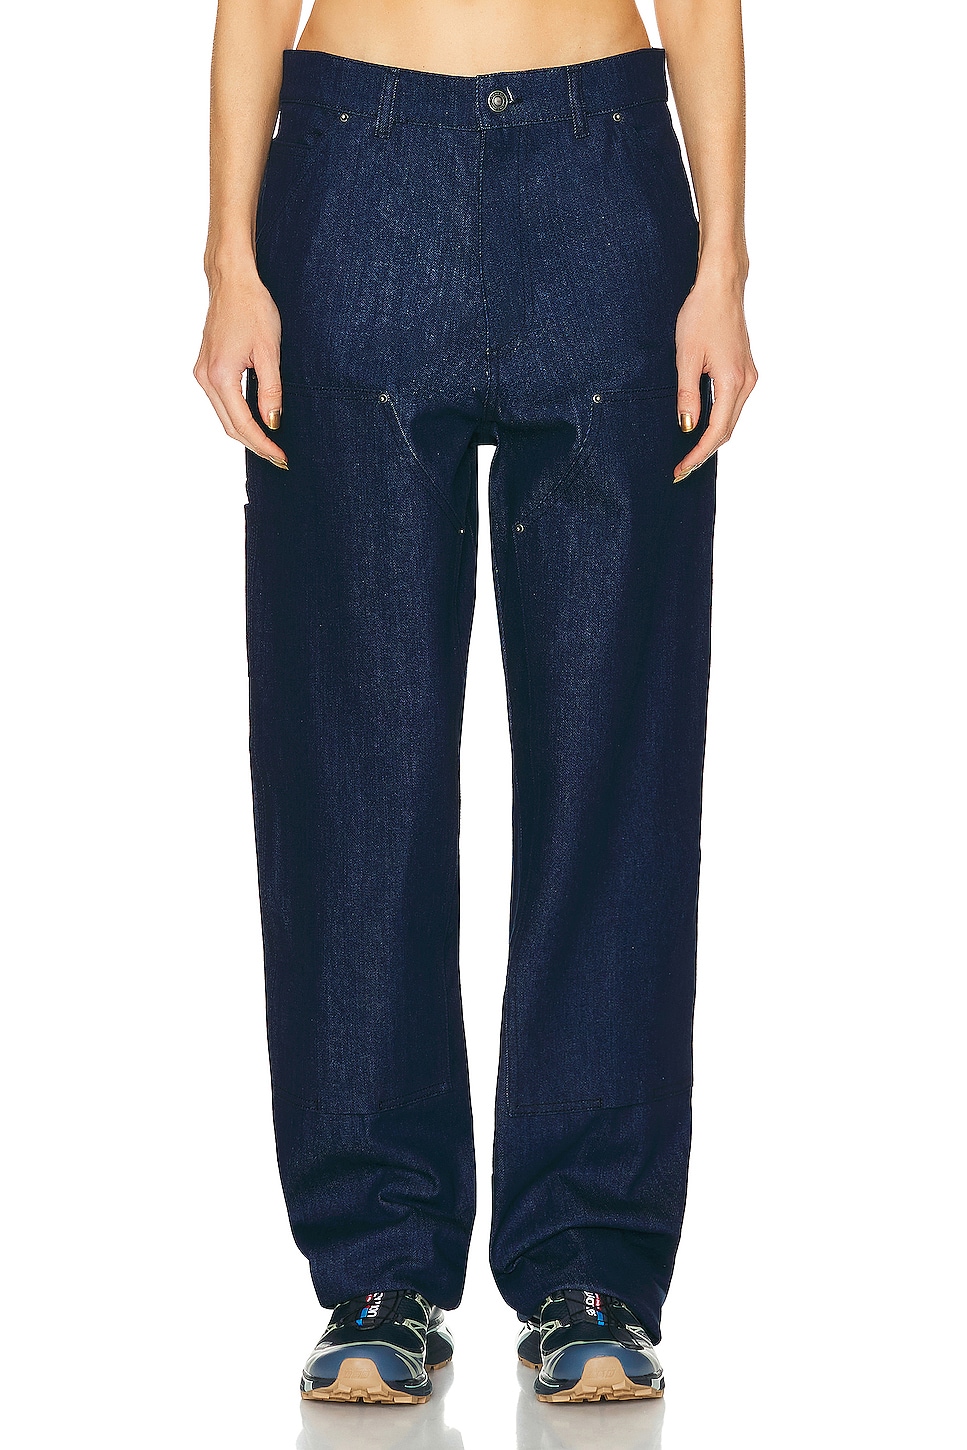 Image 1 of Sky High Farm Workwear Unisex Denim Double Knee Work Pant Woven in BLUE